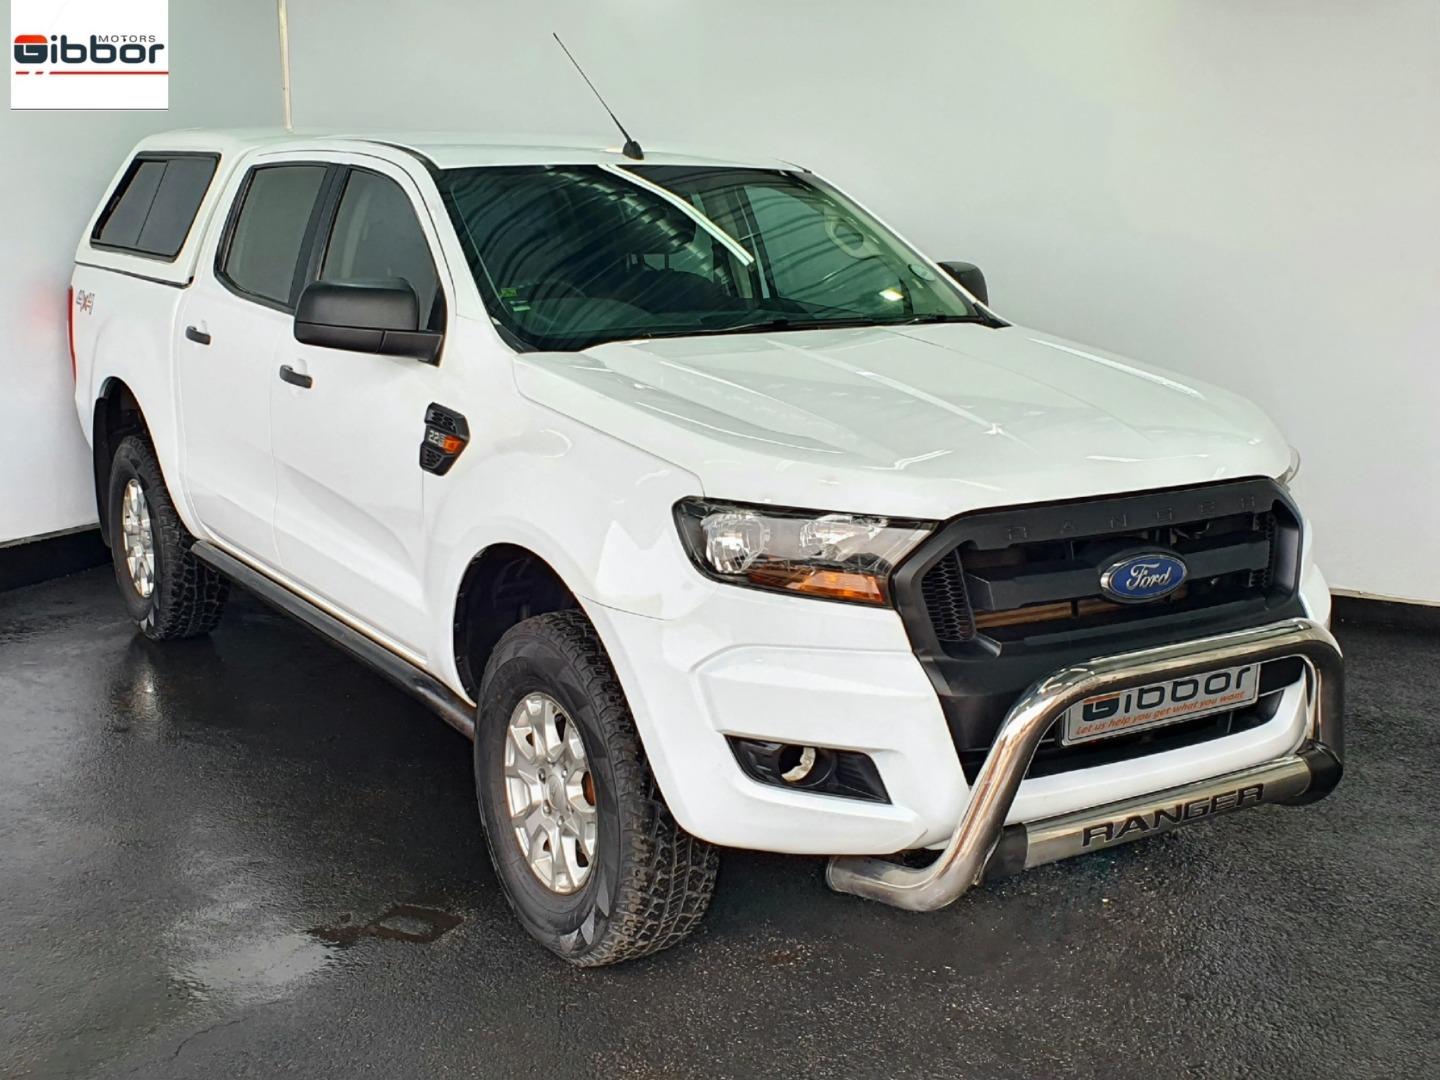 2016 Ford Ranger 2.2TDCi Double Cab Chassis Cab 4x4 XL-Plus For Sale